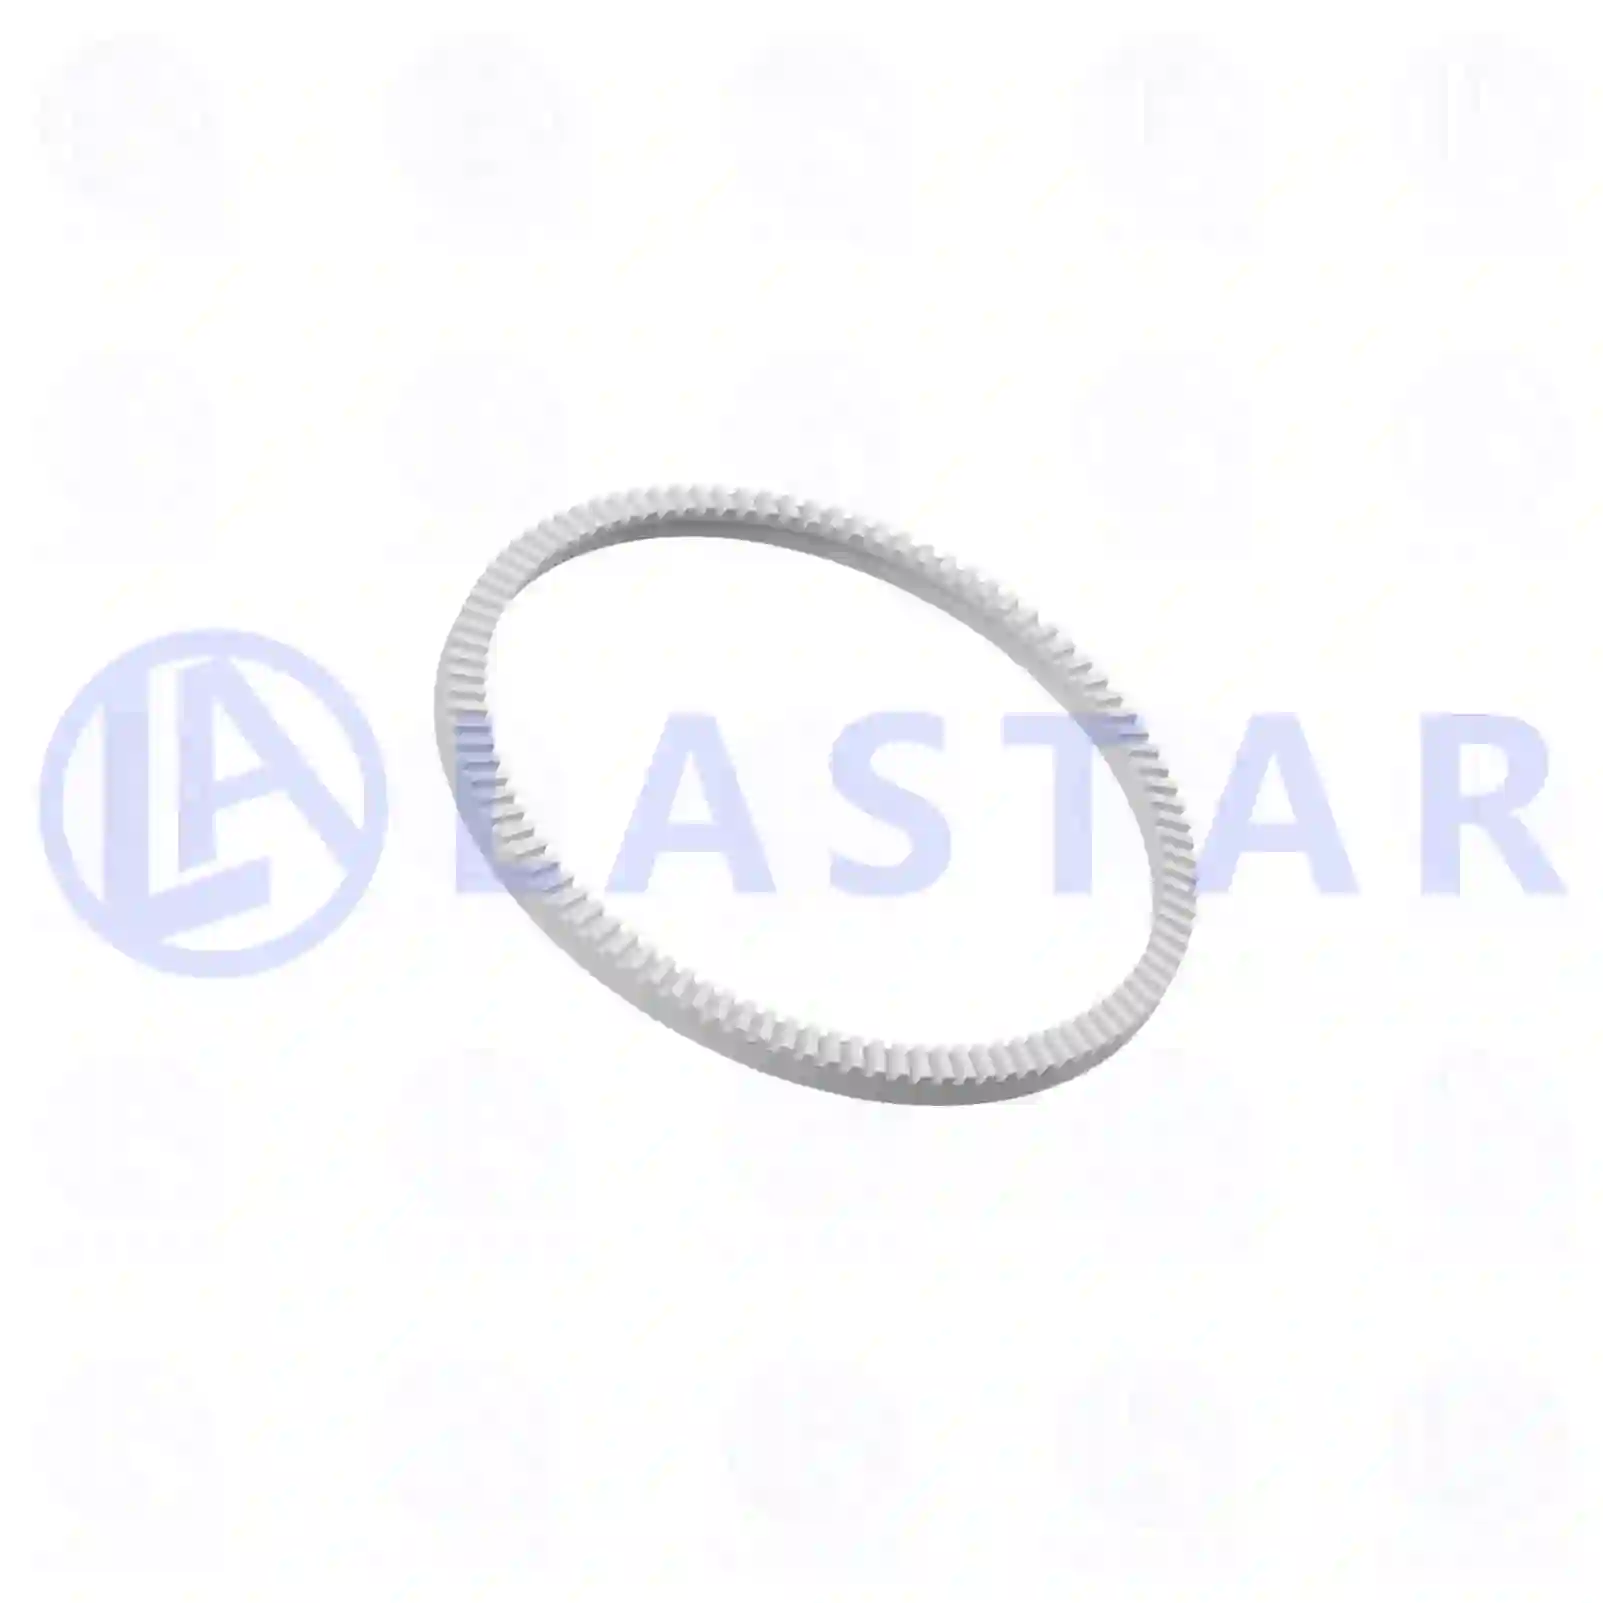 ABS ring, 77726881, 1483872, 1788291, 1790708, ZG50006-0008 ||  77726881 Lastar Spare Part | Truck Spare Parts, Auotomotive Spare Parts ABS ring, 77726881, 1483872, 1788291, 1790708, ZG50006-0008 ||  77726881 Lastar Spare Part | Truck Spare Parts, Auotomotive Spare Parts